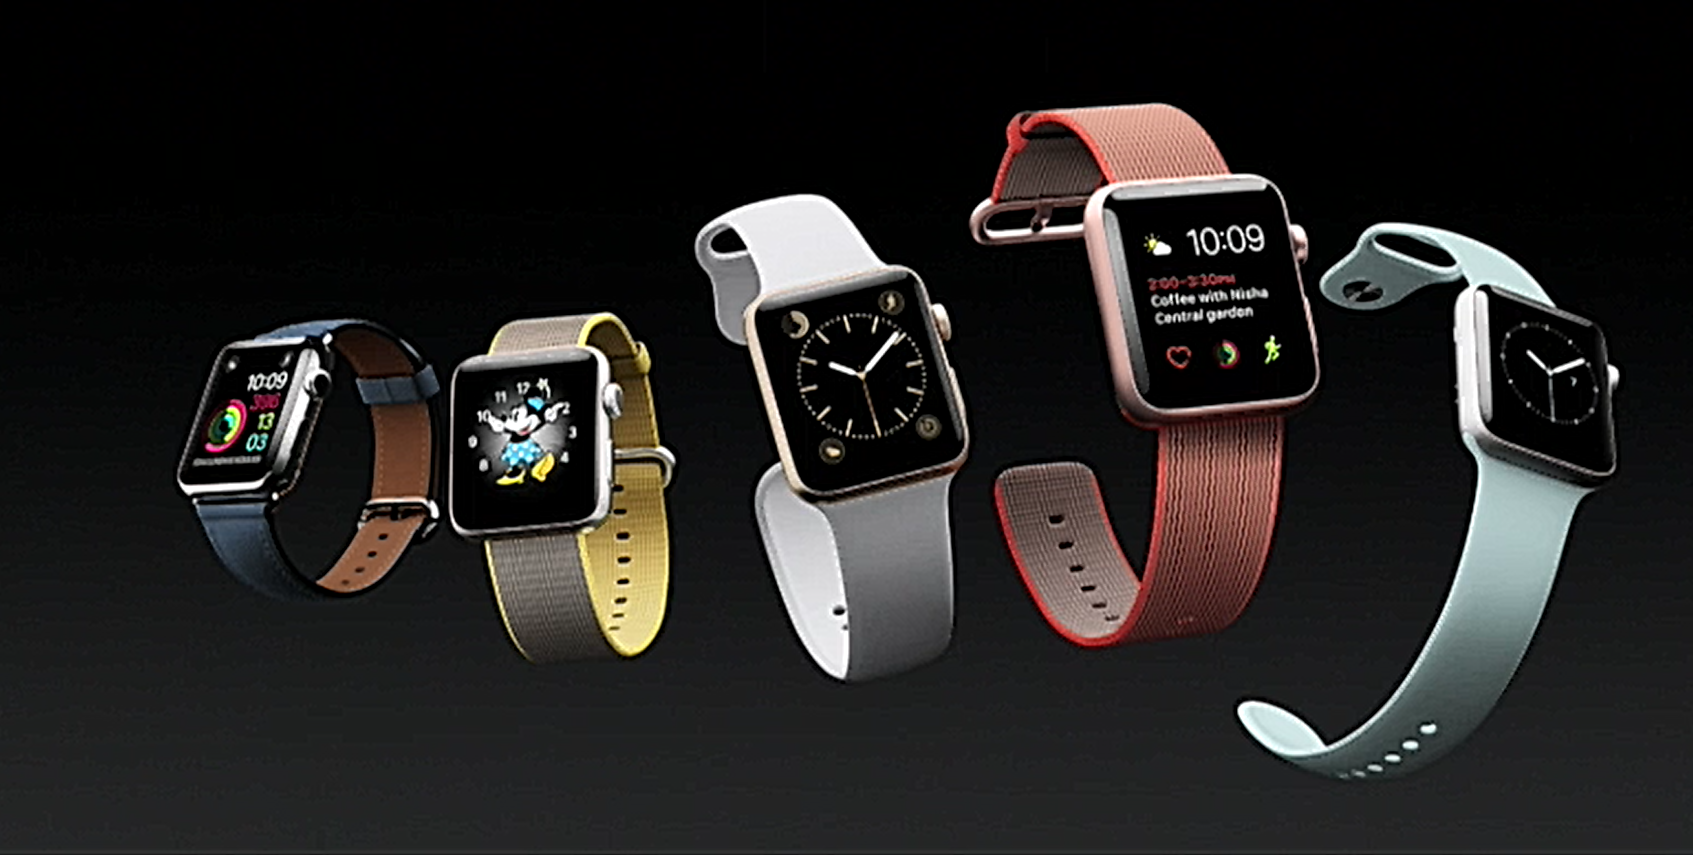 Apple Watch sales will fall despite Series 2 launch - report | Trusted